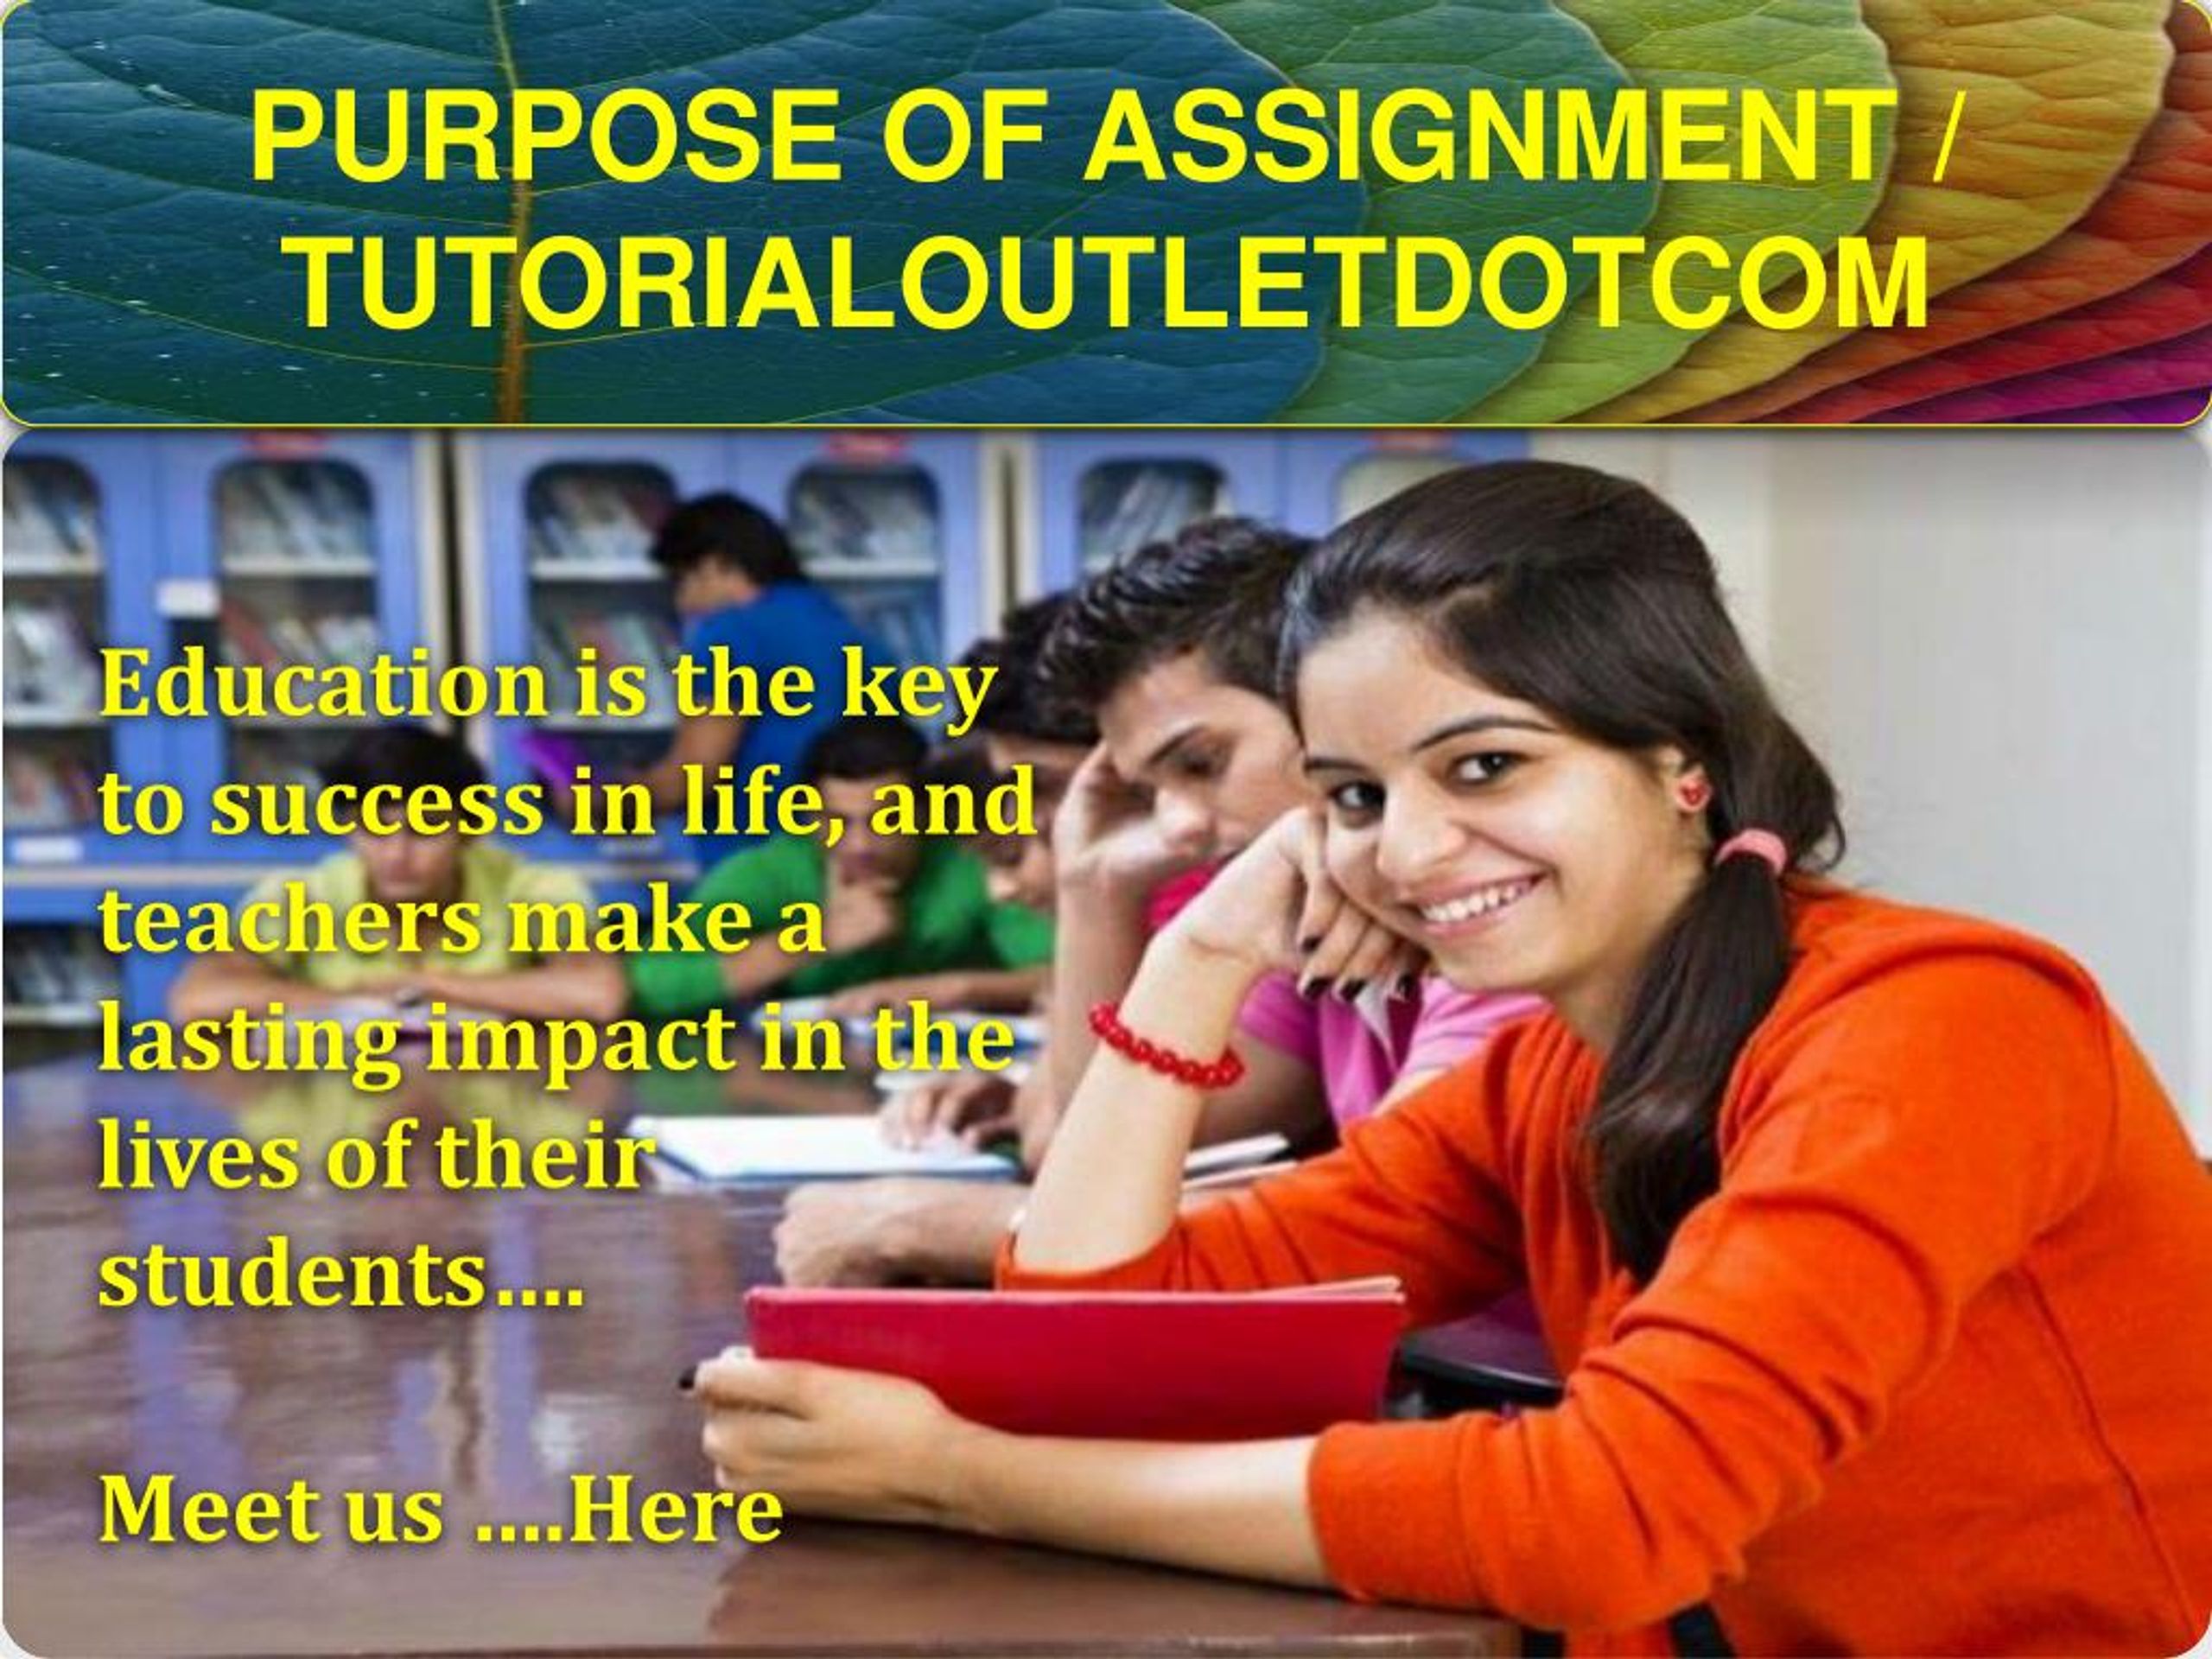 the purpose of an assignment is